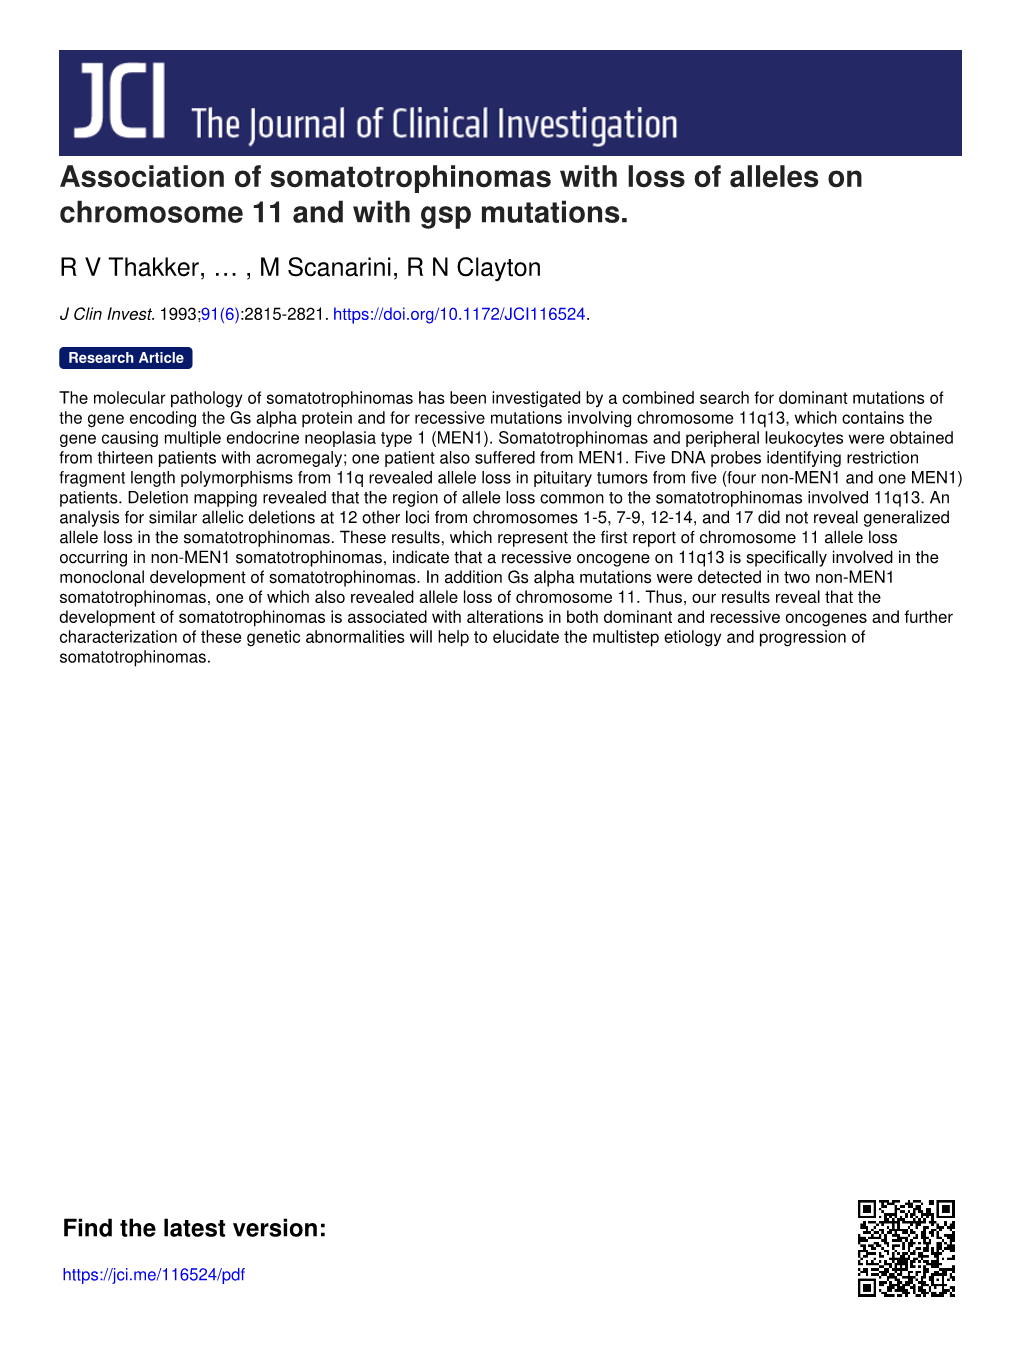 Association of Somatotrophinomas with Loss of Alleles on Chromosome 11 and with Gsp Mutations